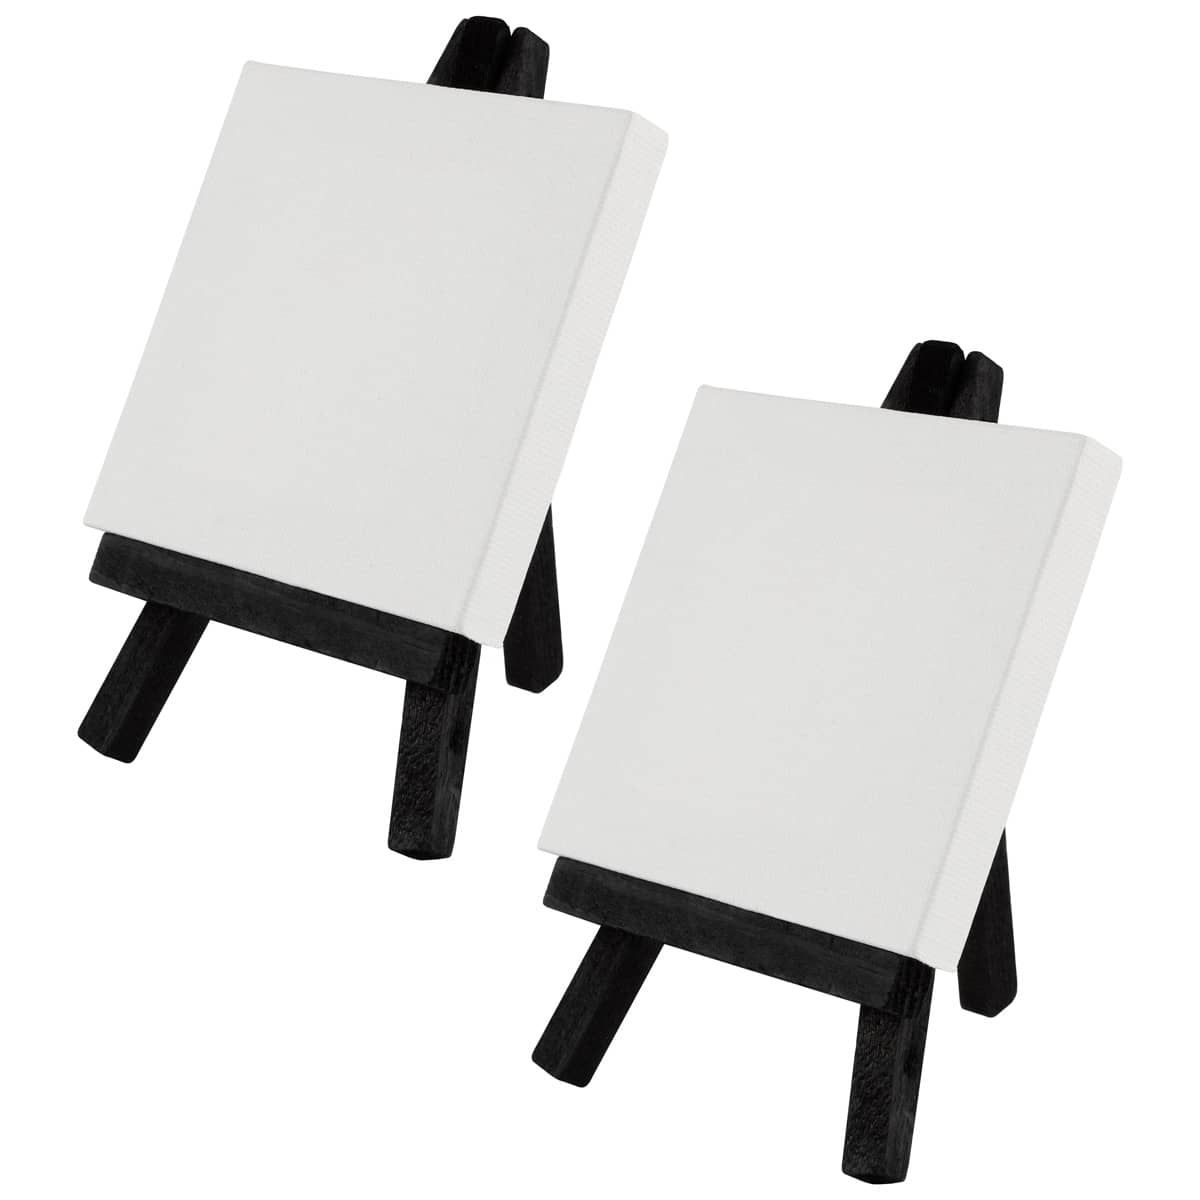 Creative Mark Ultra Mini Black Stretched Canvas & Black Wood Easel for  SmAll Paintings - 3x4 inch [20 pack] Perfect to Paint or Displaying  SmAll-scale